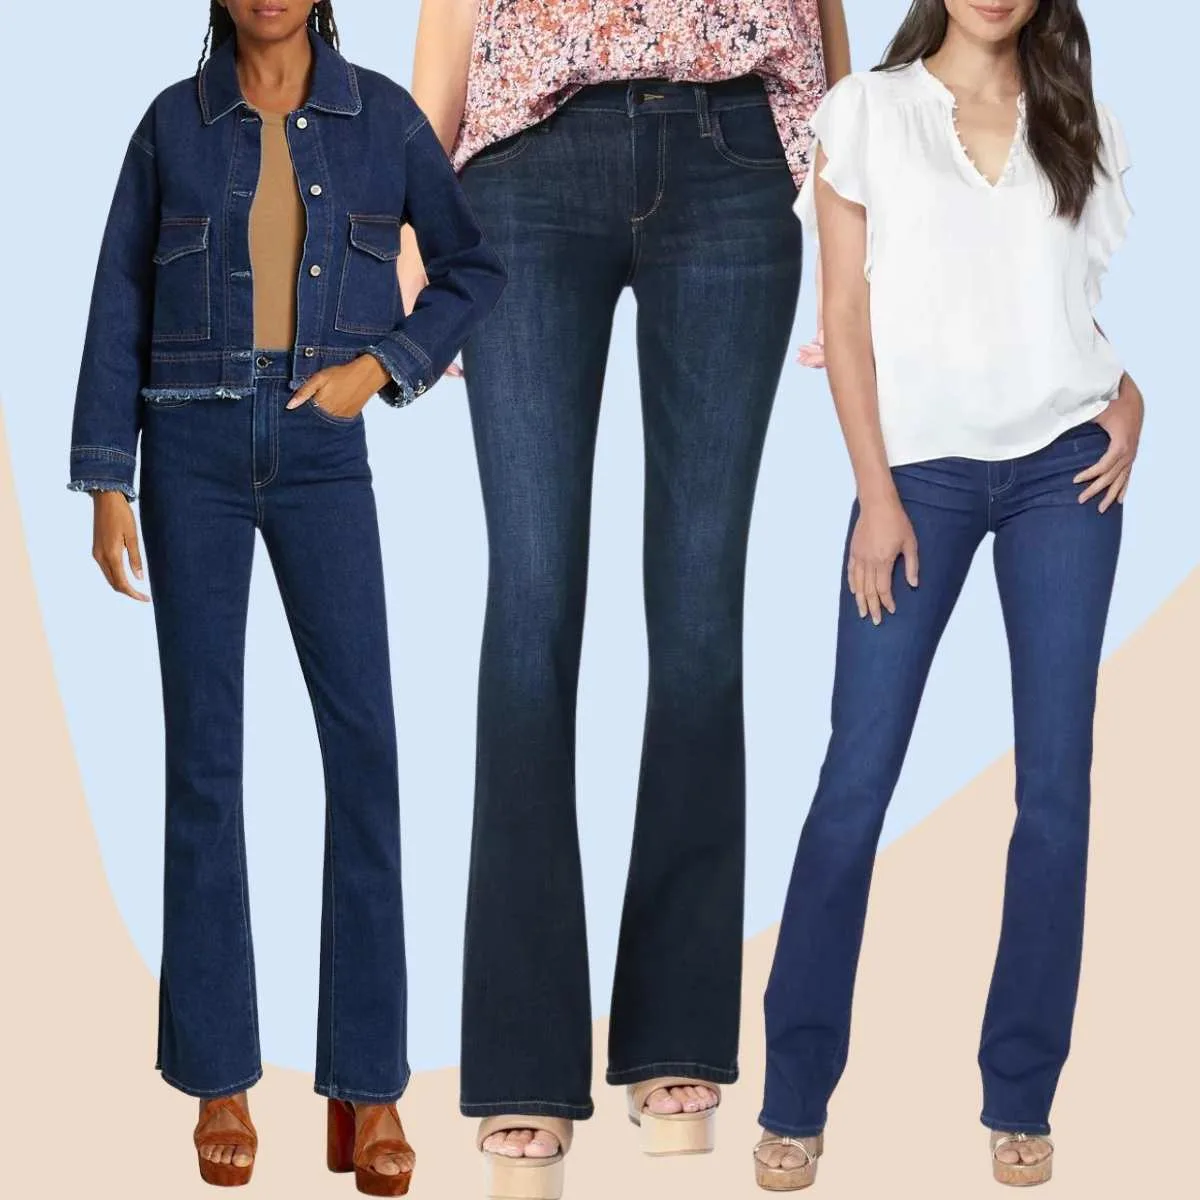 Collage of 4 women wearing platform sandals with bootcut jeans outfits.